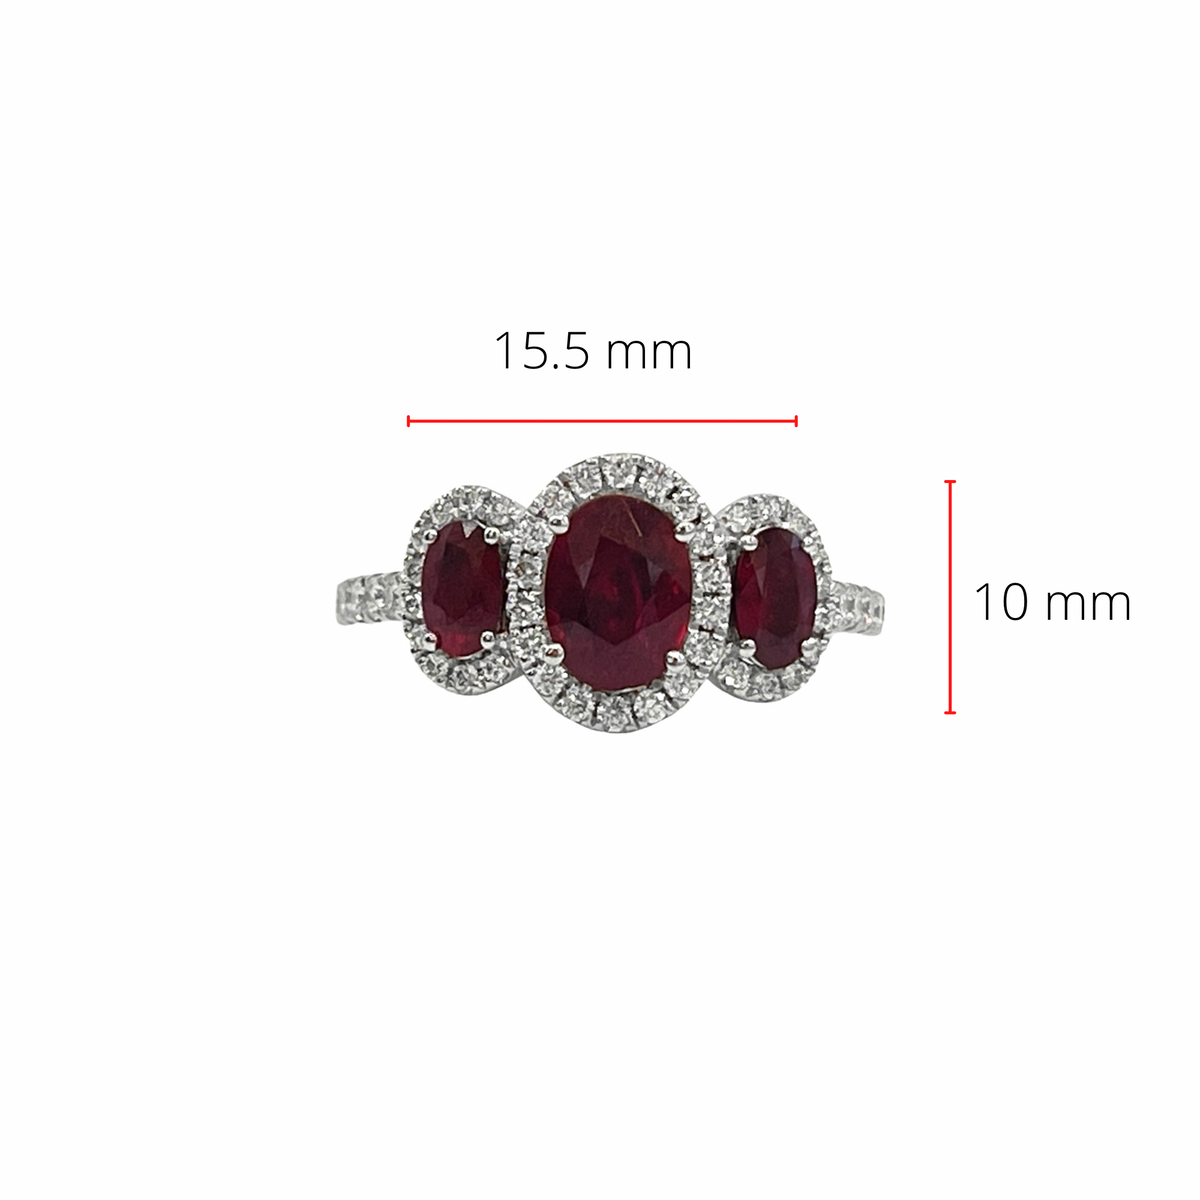 Platinum 1.38cttw Ruby and 0.42cttw Diamond Ring - Size 7